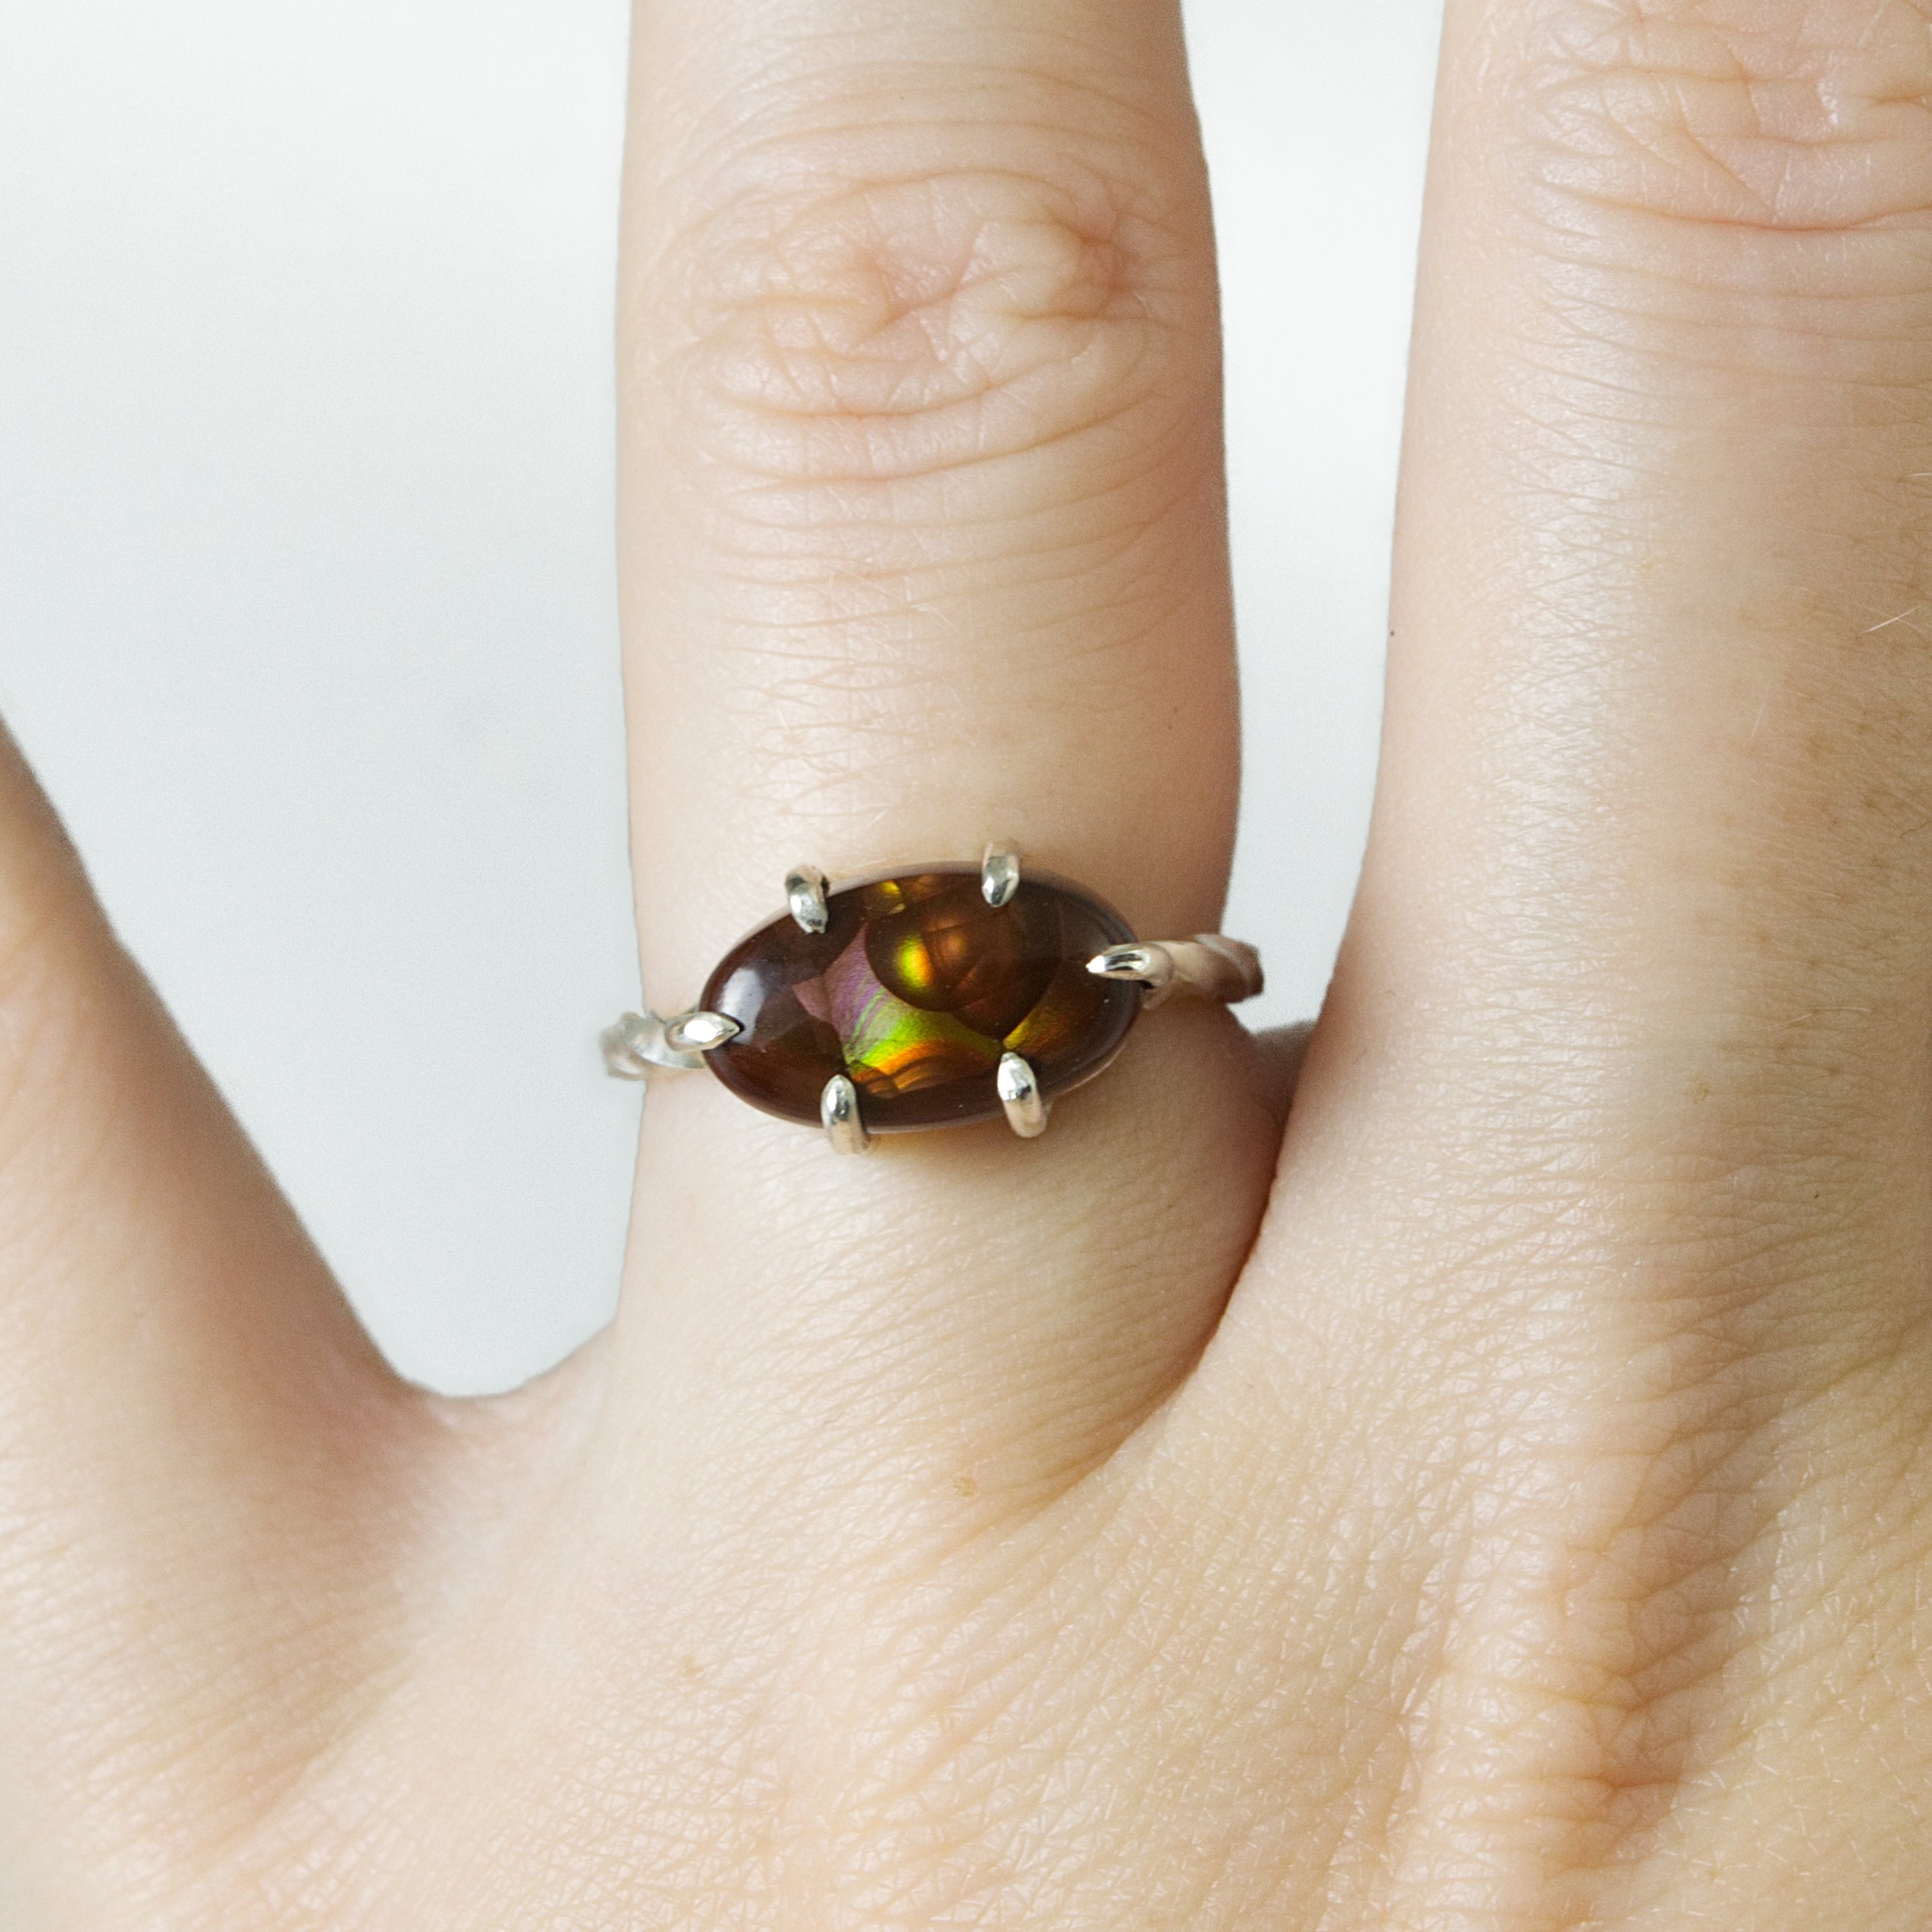 Fire Agate Twist Ring #2 - Size 6.5